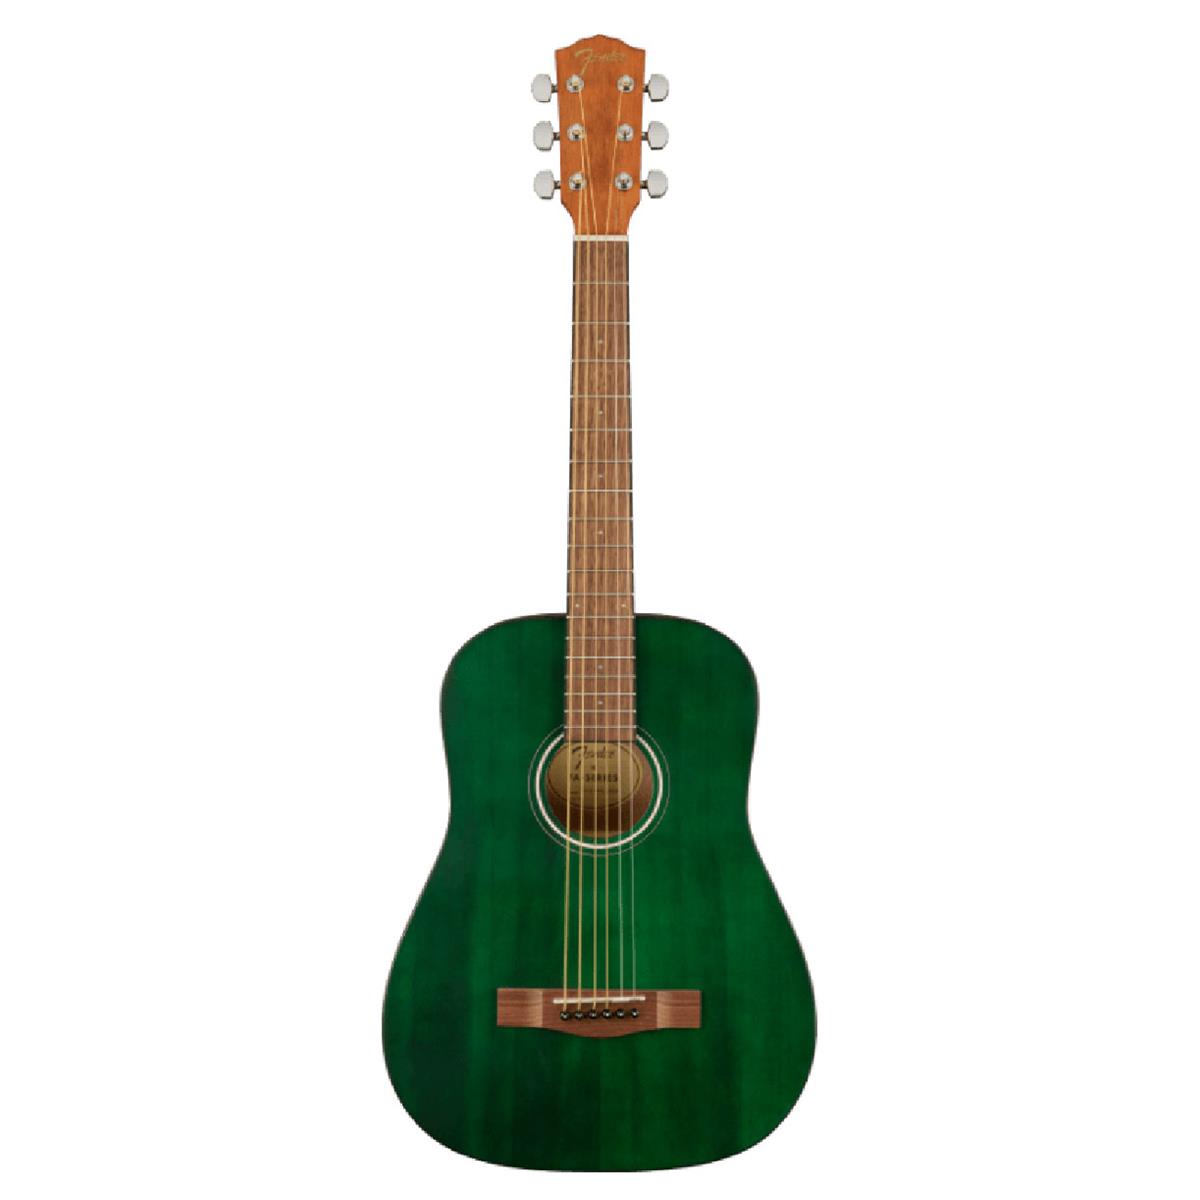 Fender FA-15 3/4 Scale Steel String Acoustic Guitar with Gig Bag, Green -  0971170192